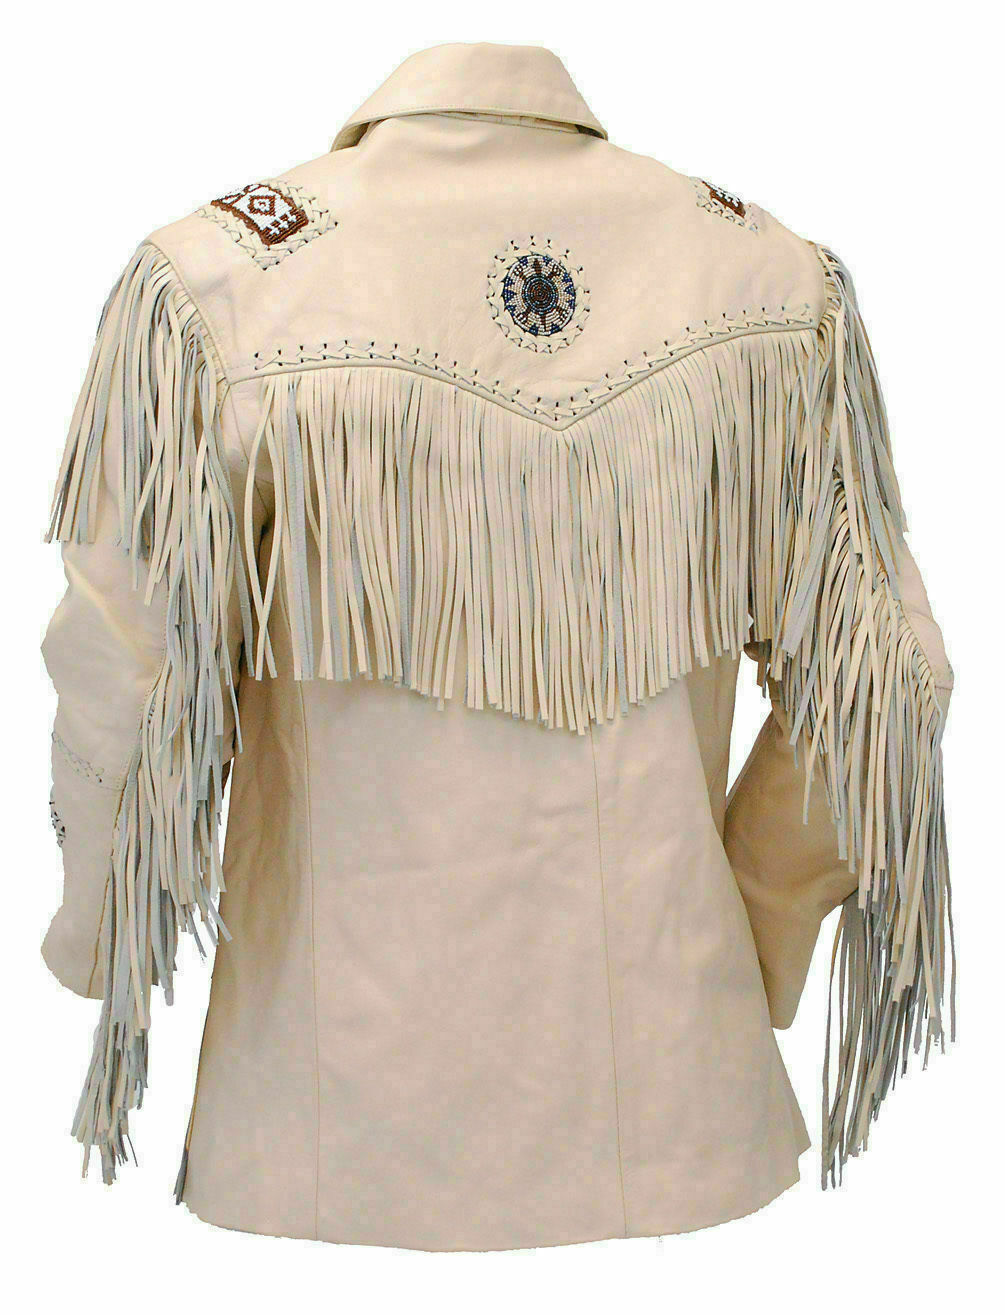 Men's Native American Suede Leather Fringes & Beaded